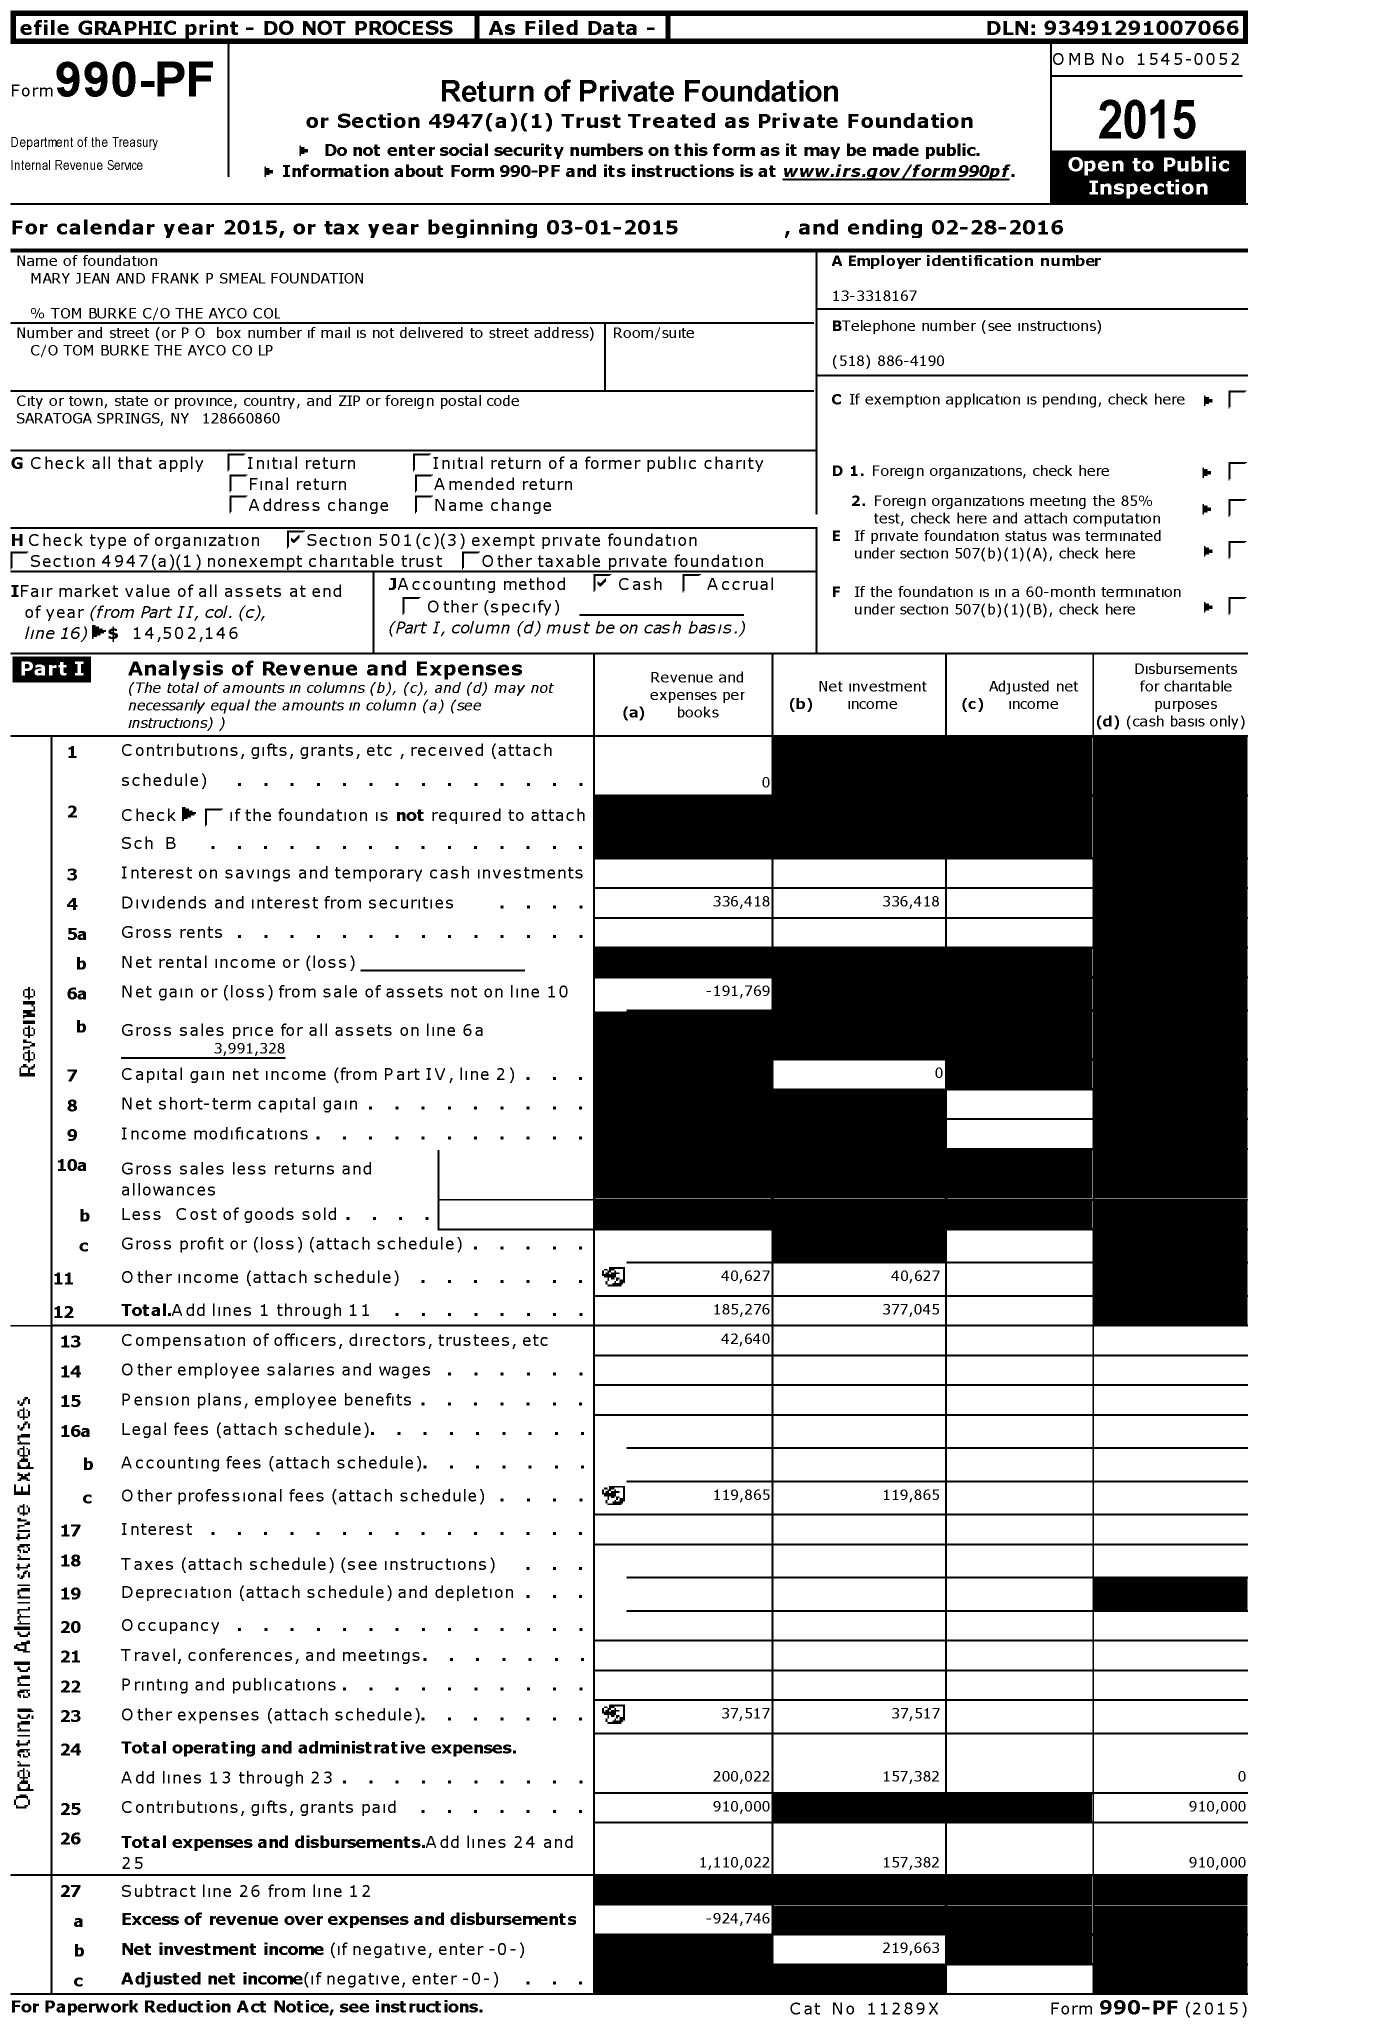 Image of first page of 2015 Form 990PF for Mary Jean and Frank P Smeal Foundation